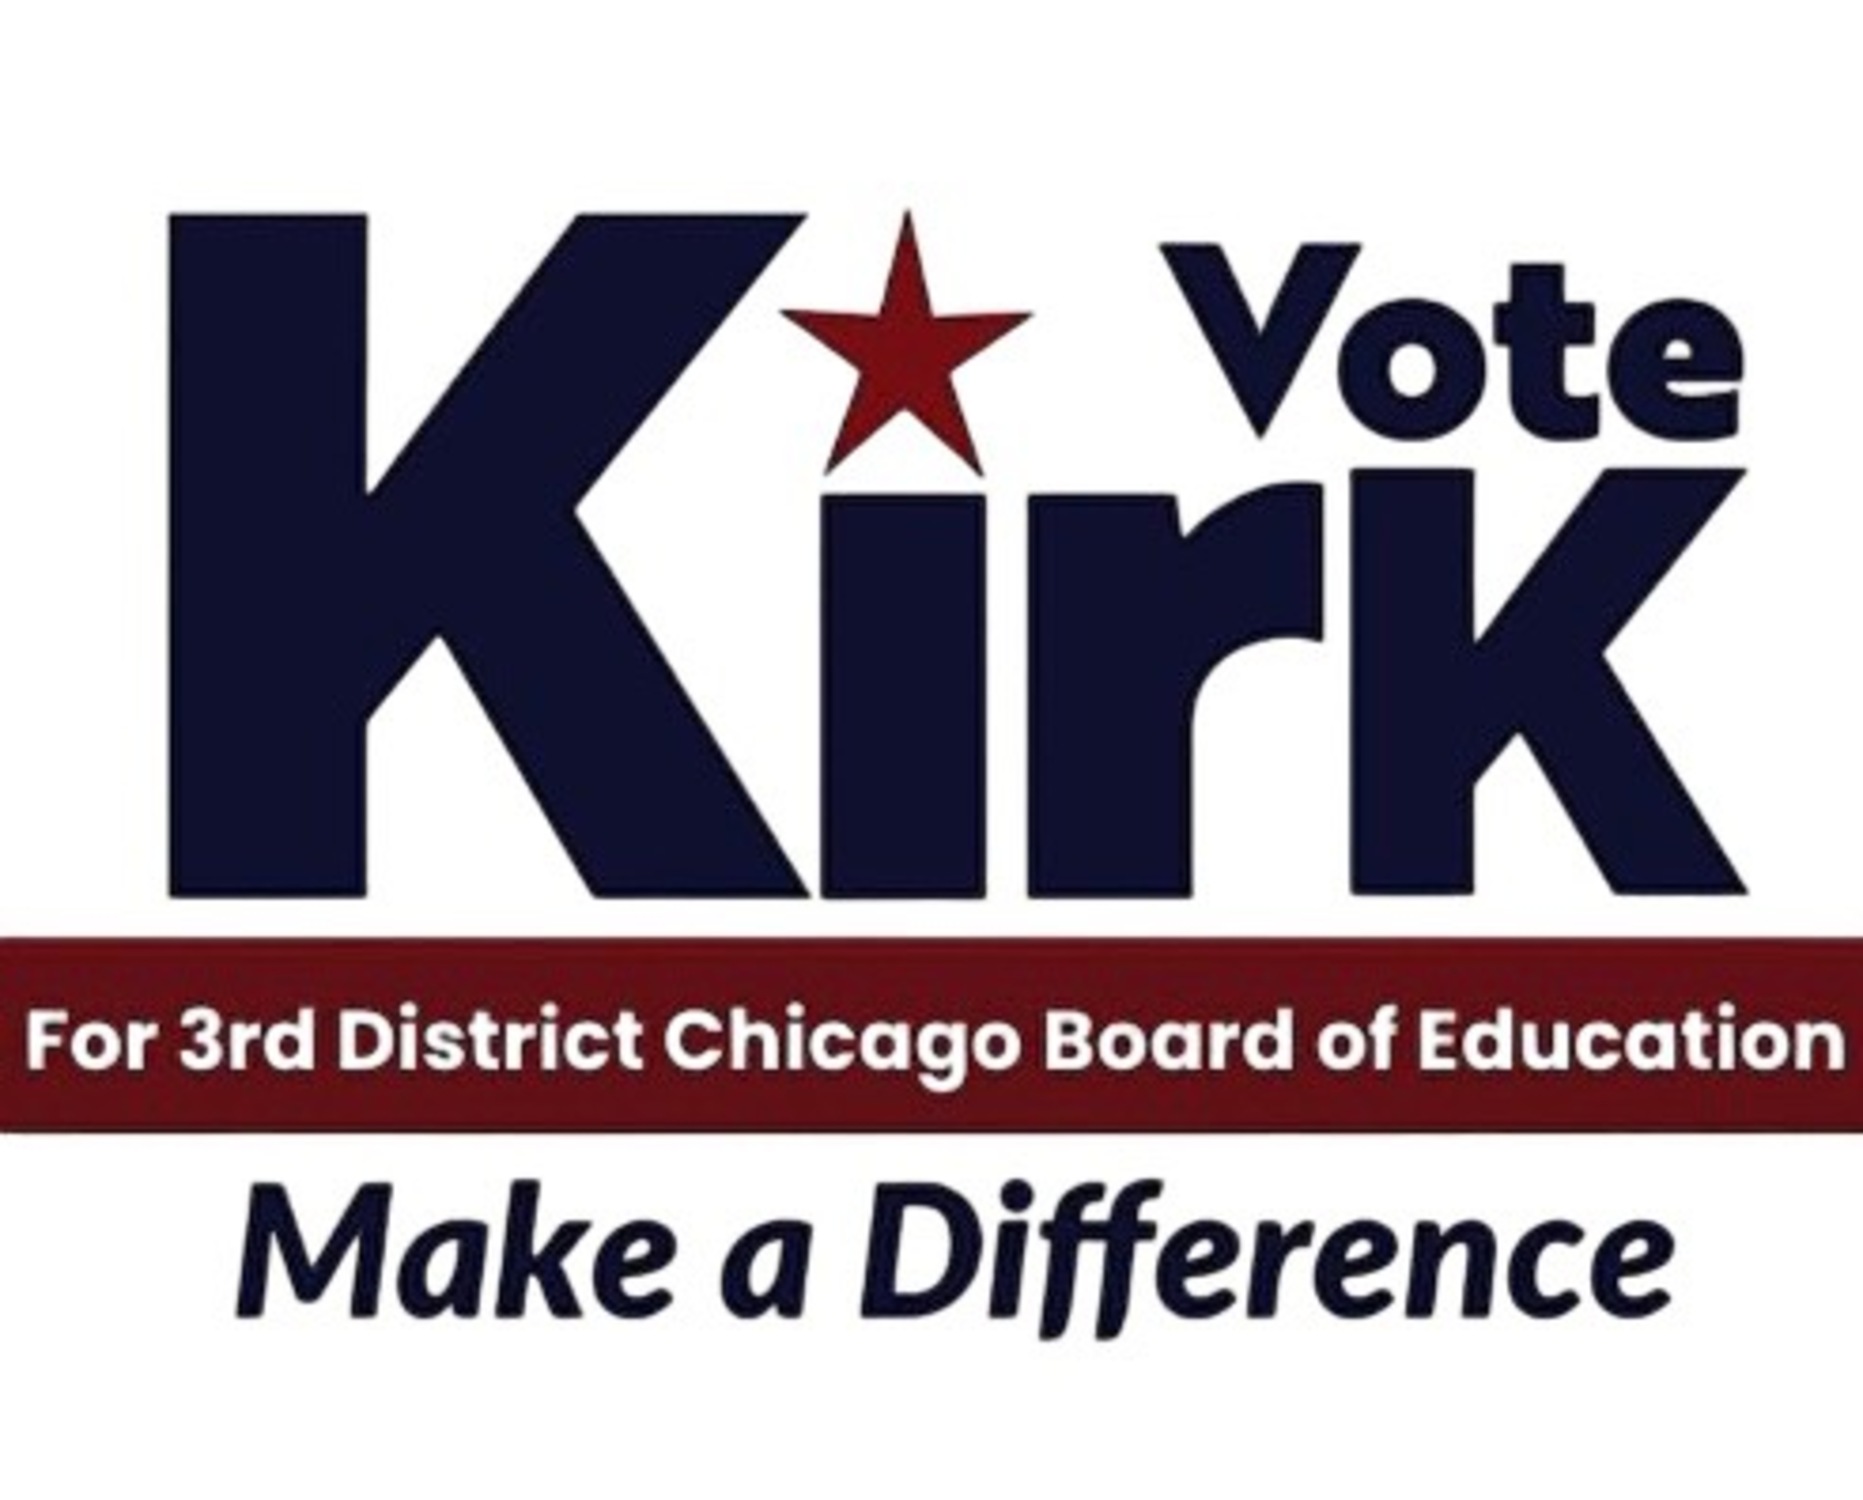 Vote Kirk for 4th District State Representative - Make a Difference